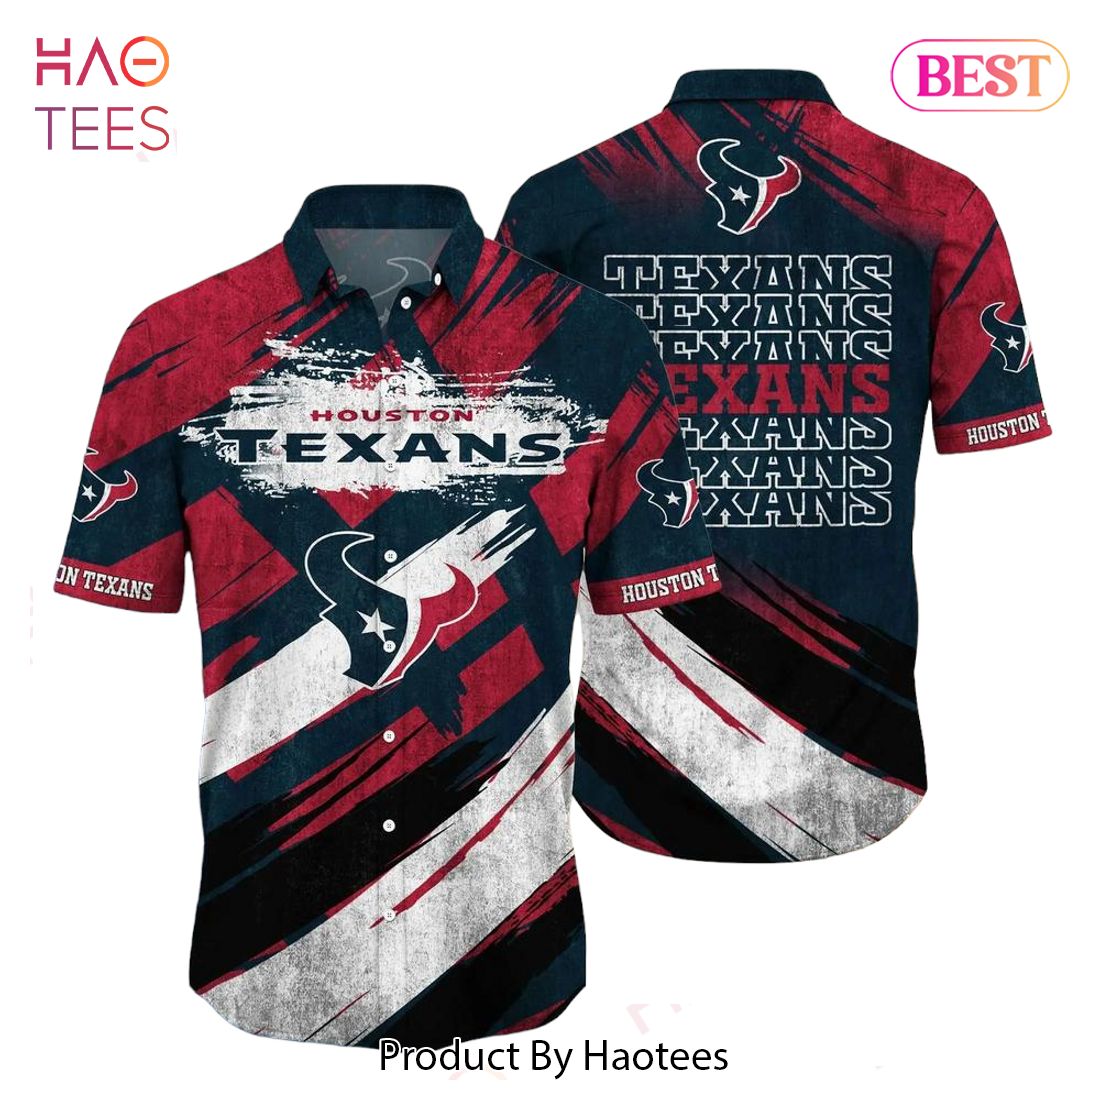 Houston Texans NFL Hawaiian Shirt New Collection Trending Best Gift For Fans